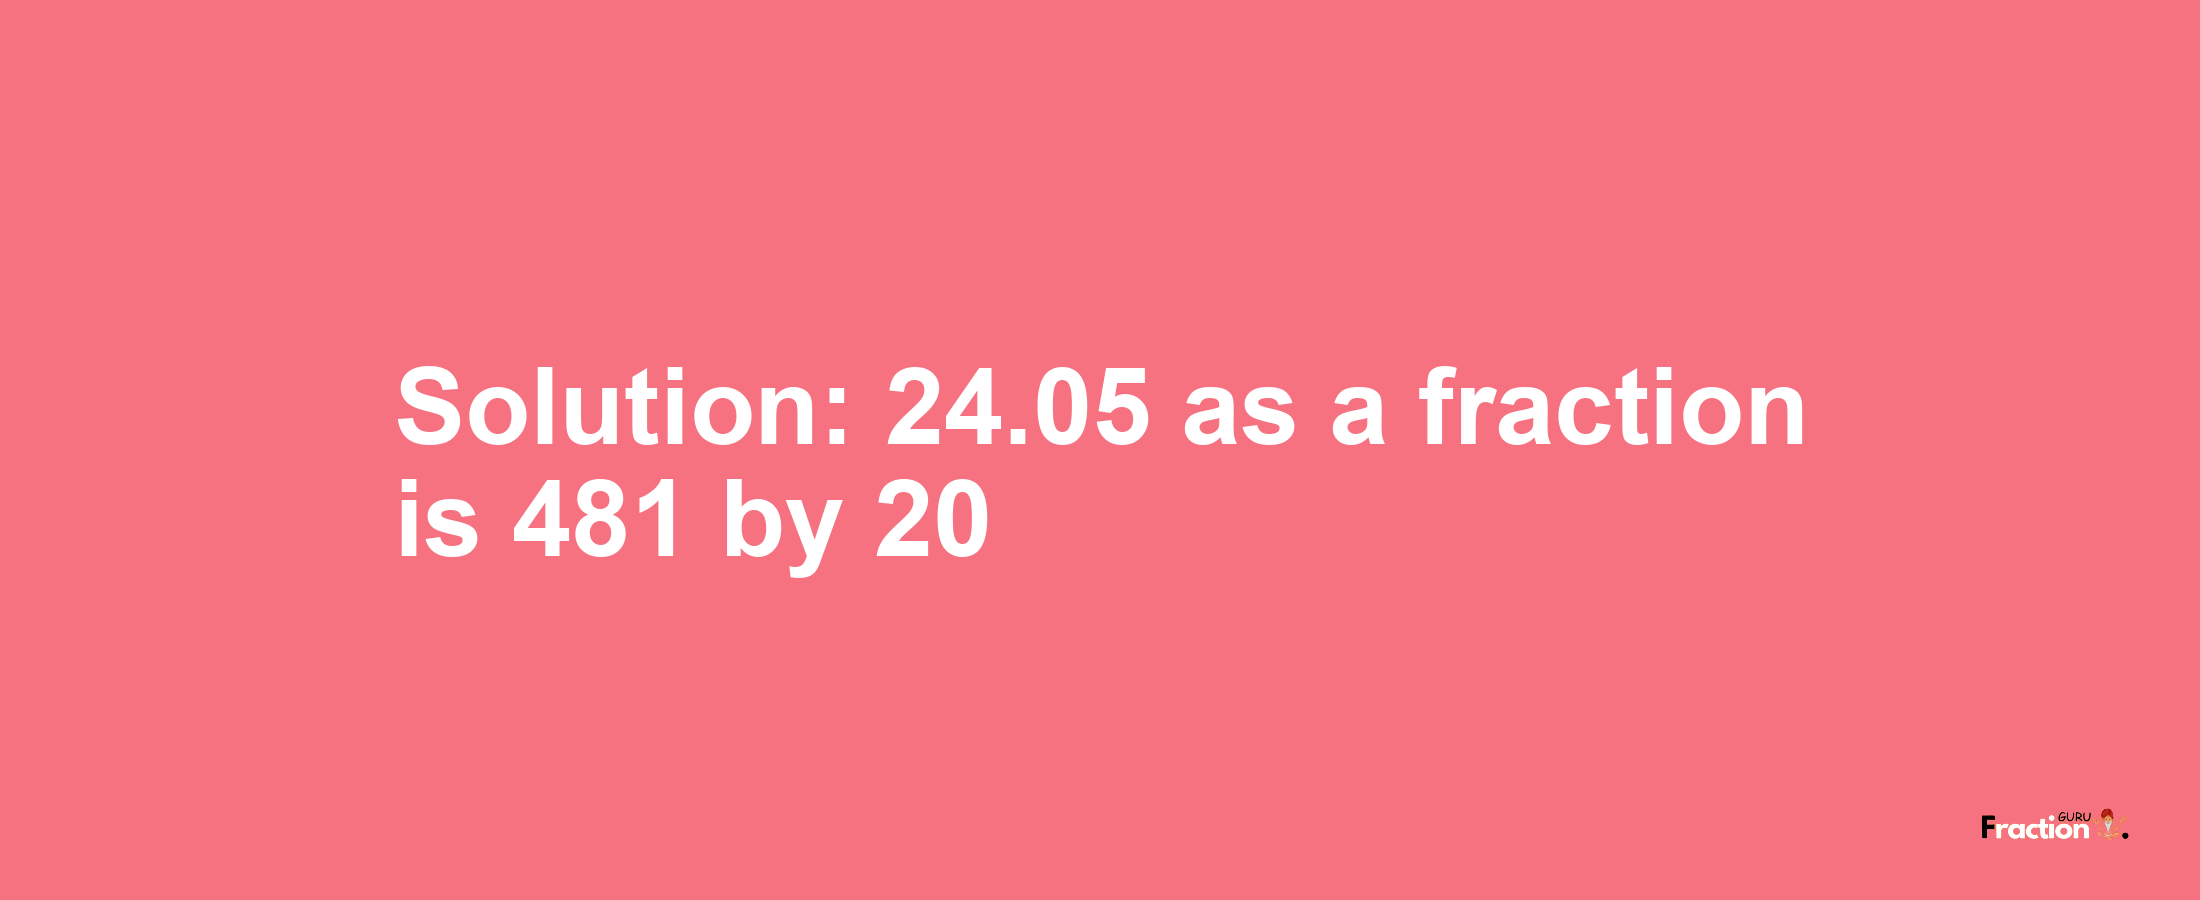 Solution:24.05 as a fraction is 481/20